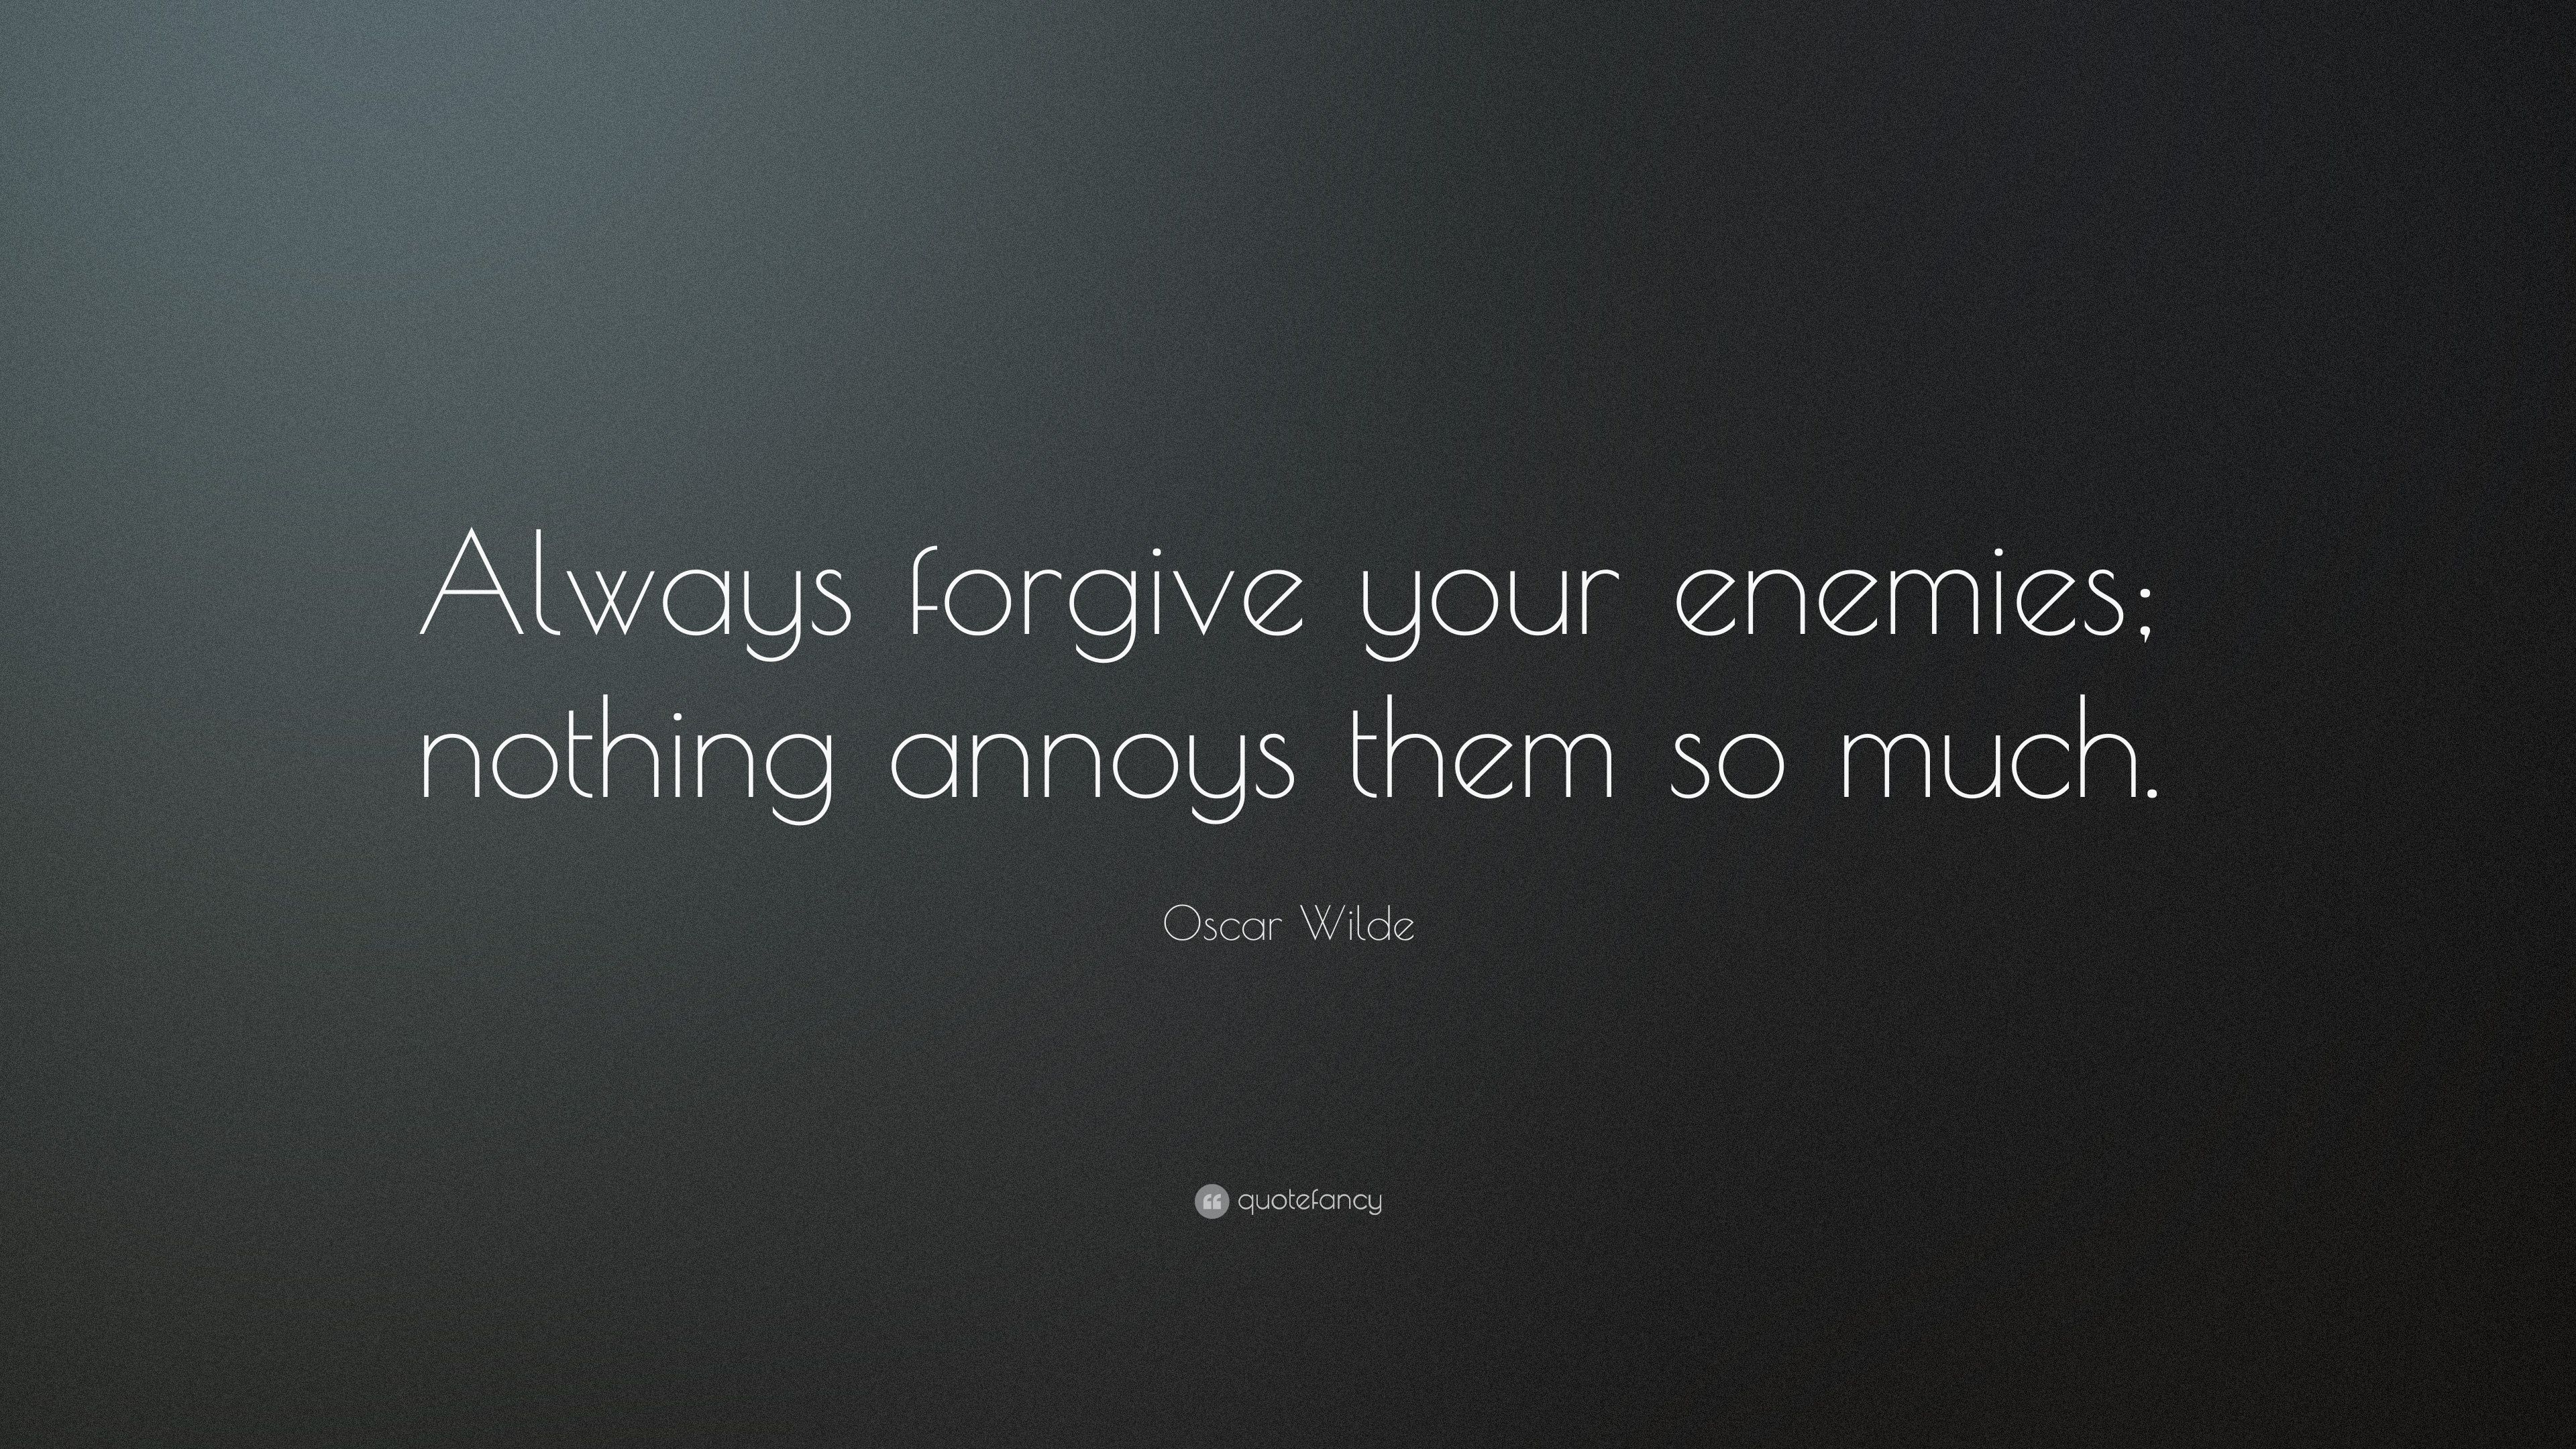 Oscar Wilde Quote: “Always forgive your enemies; nothing annoys